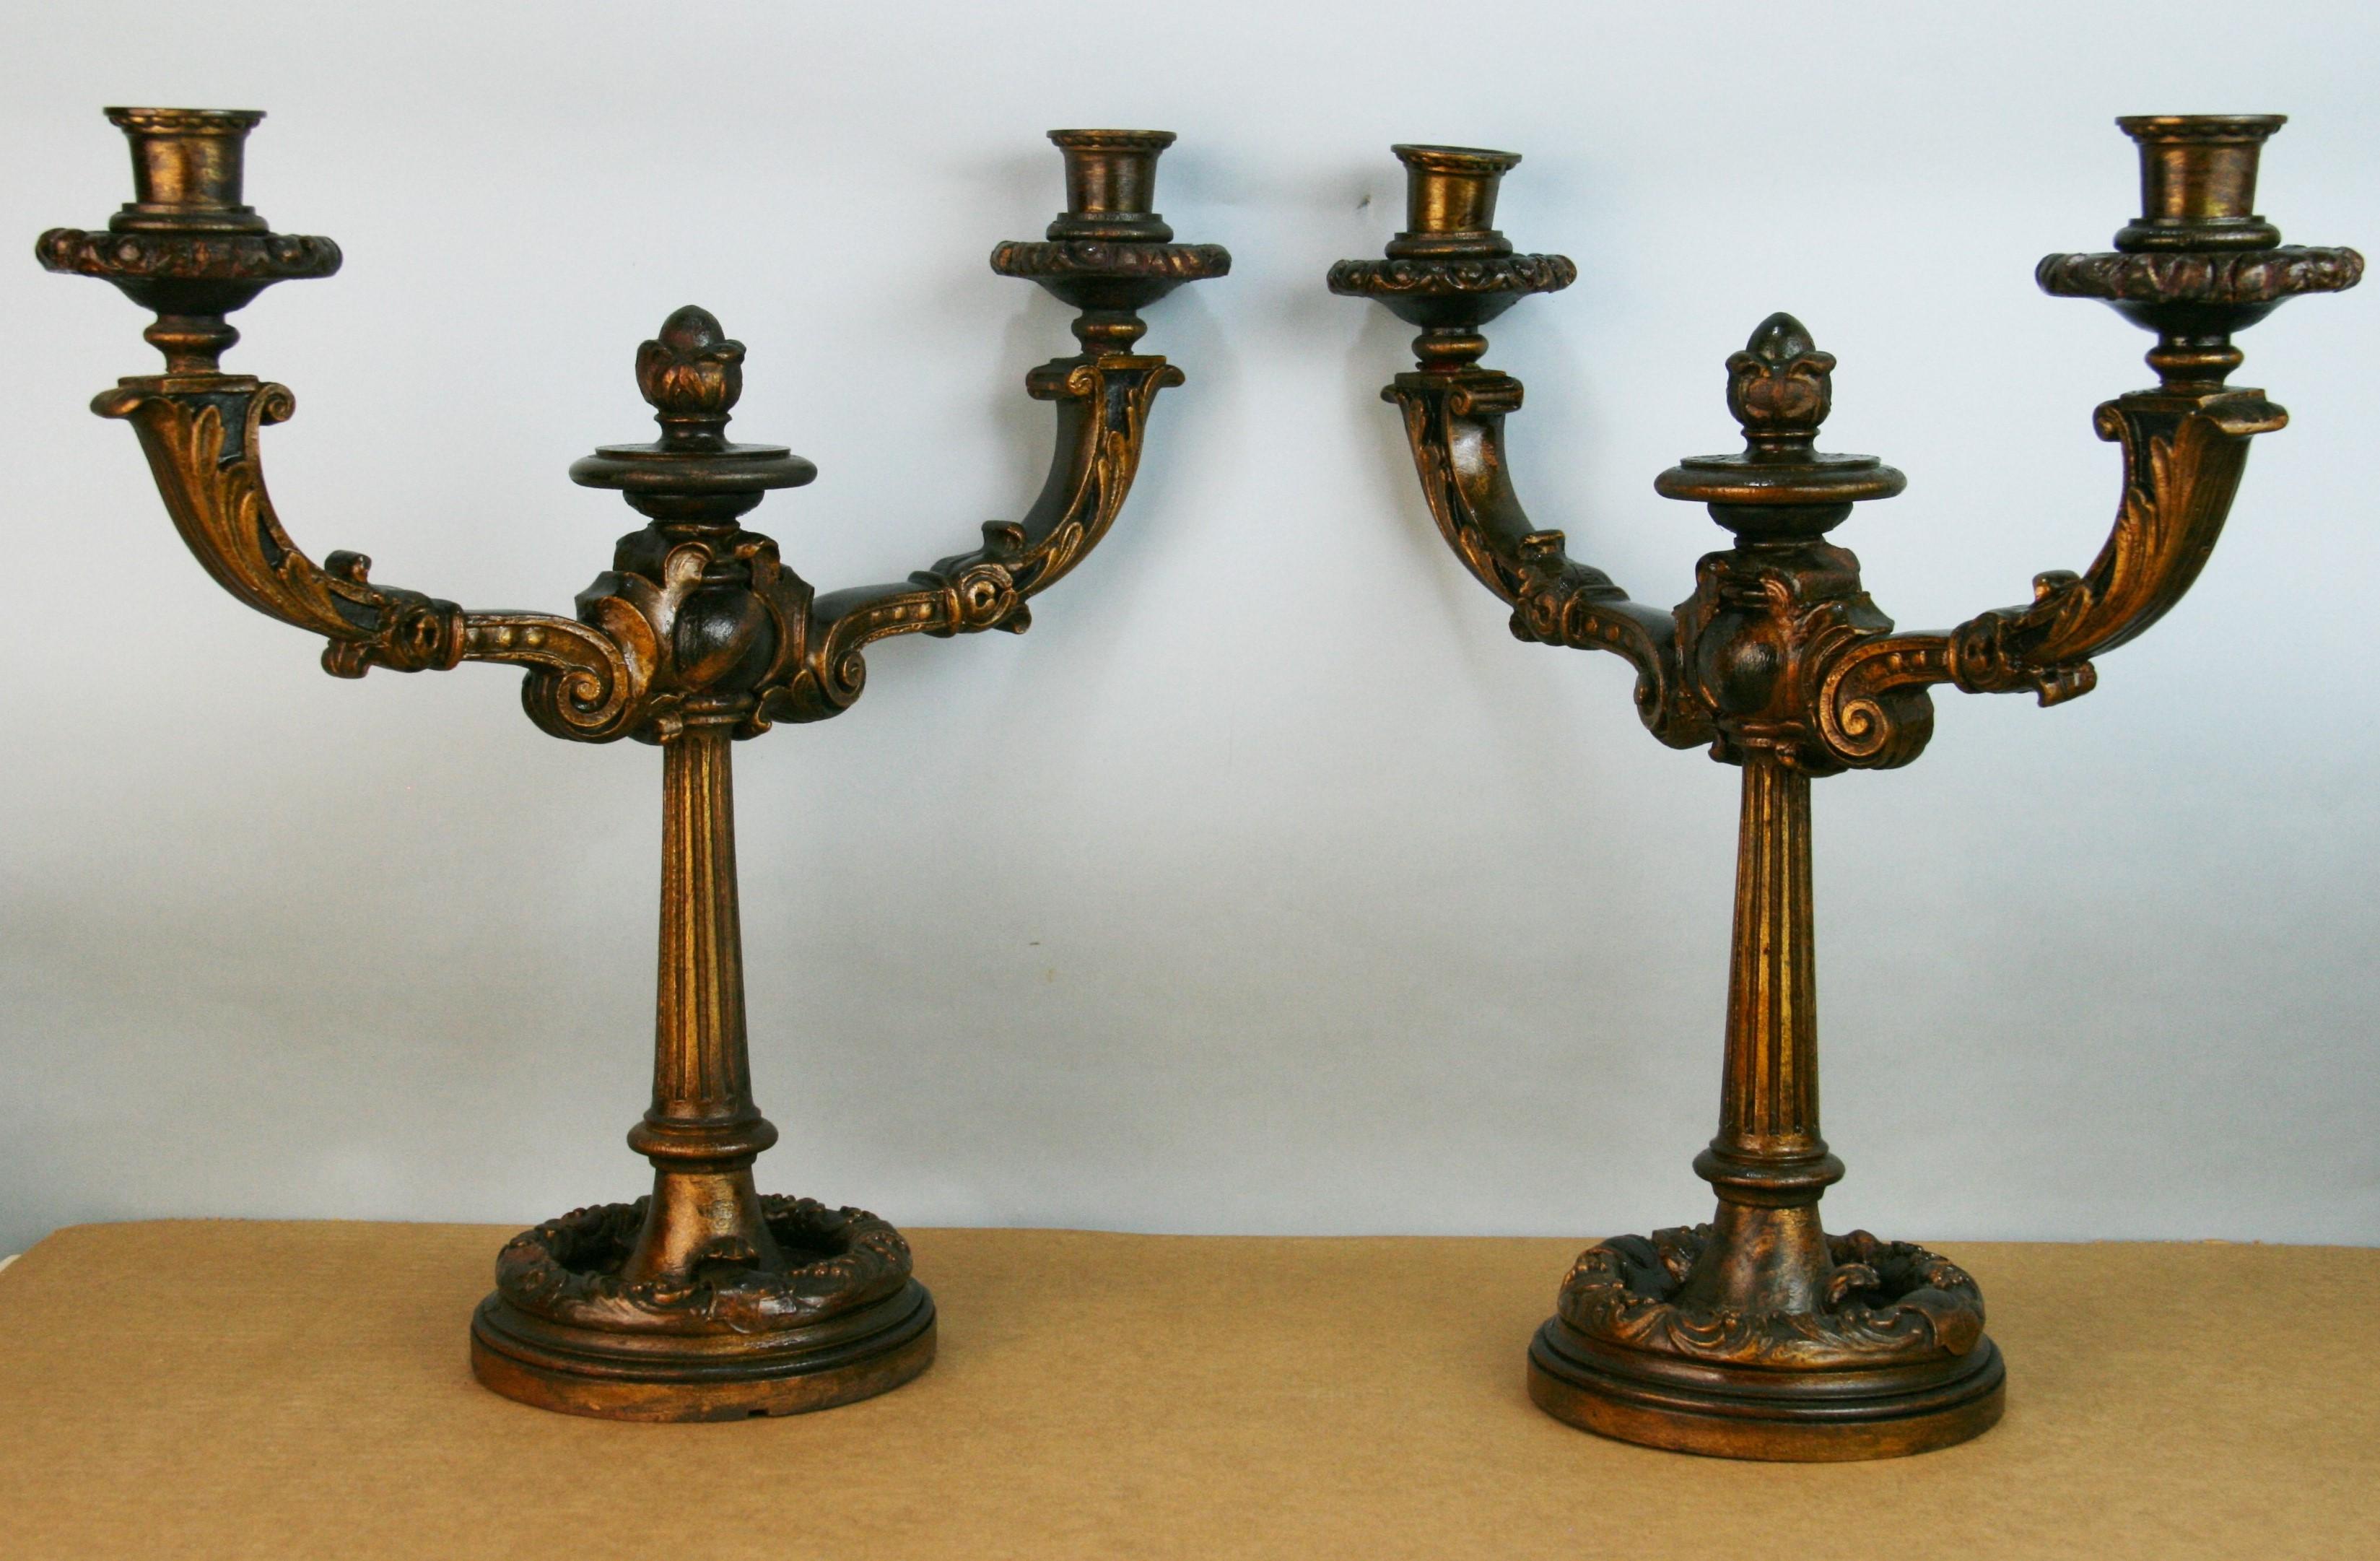 Pair of Italian Wood and Gesso Decorative Candelabras Late 19th Century In Good Condition For Sale In Douglas Manor, NY